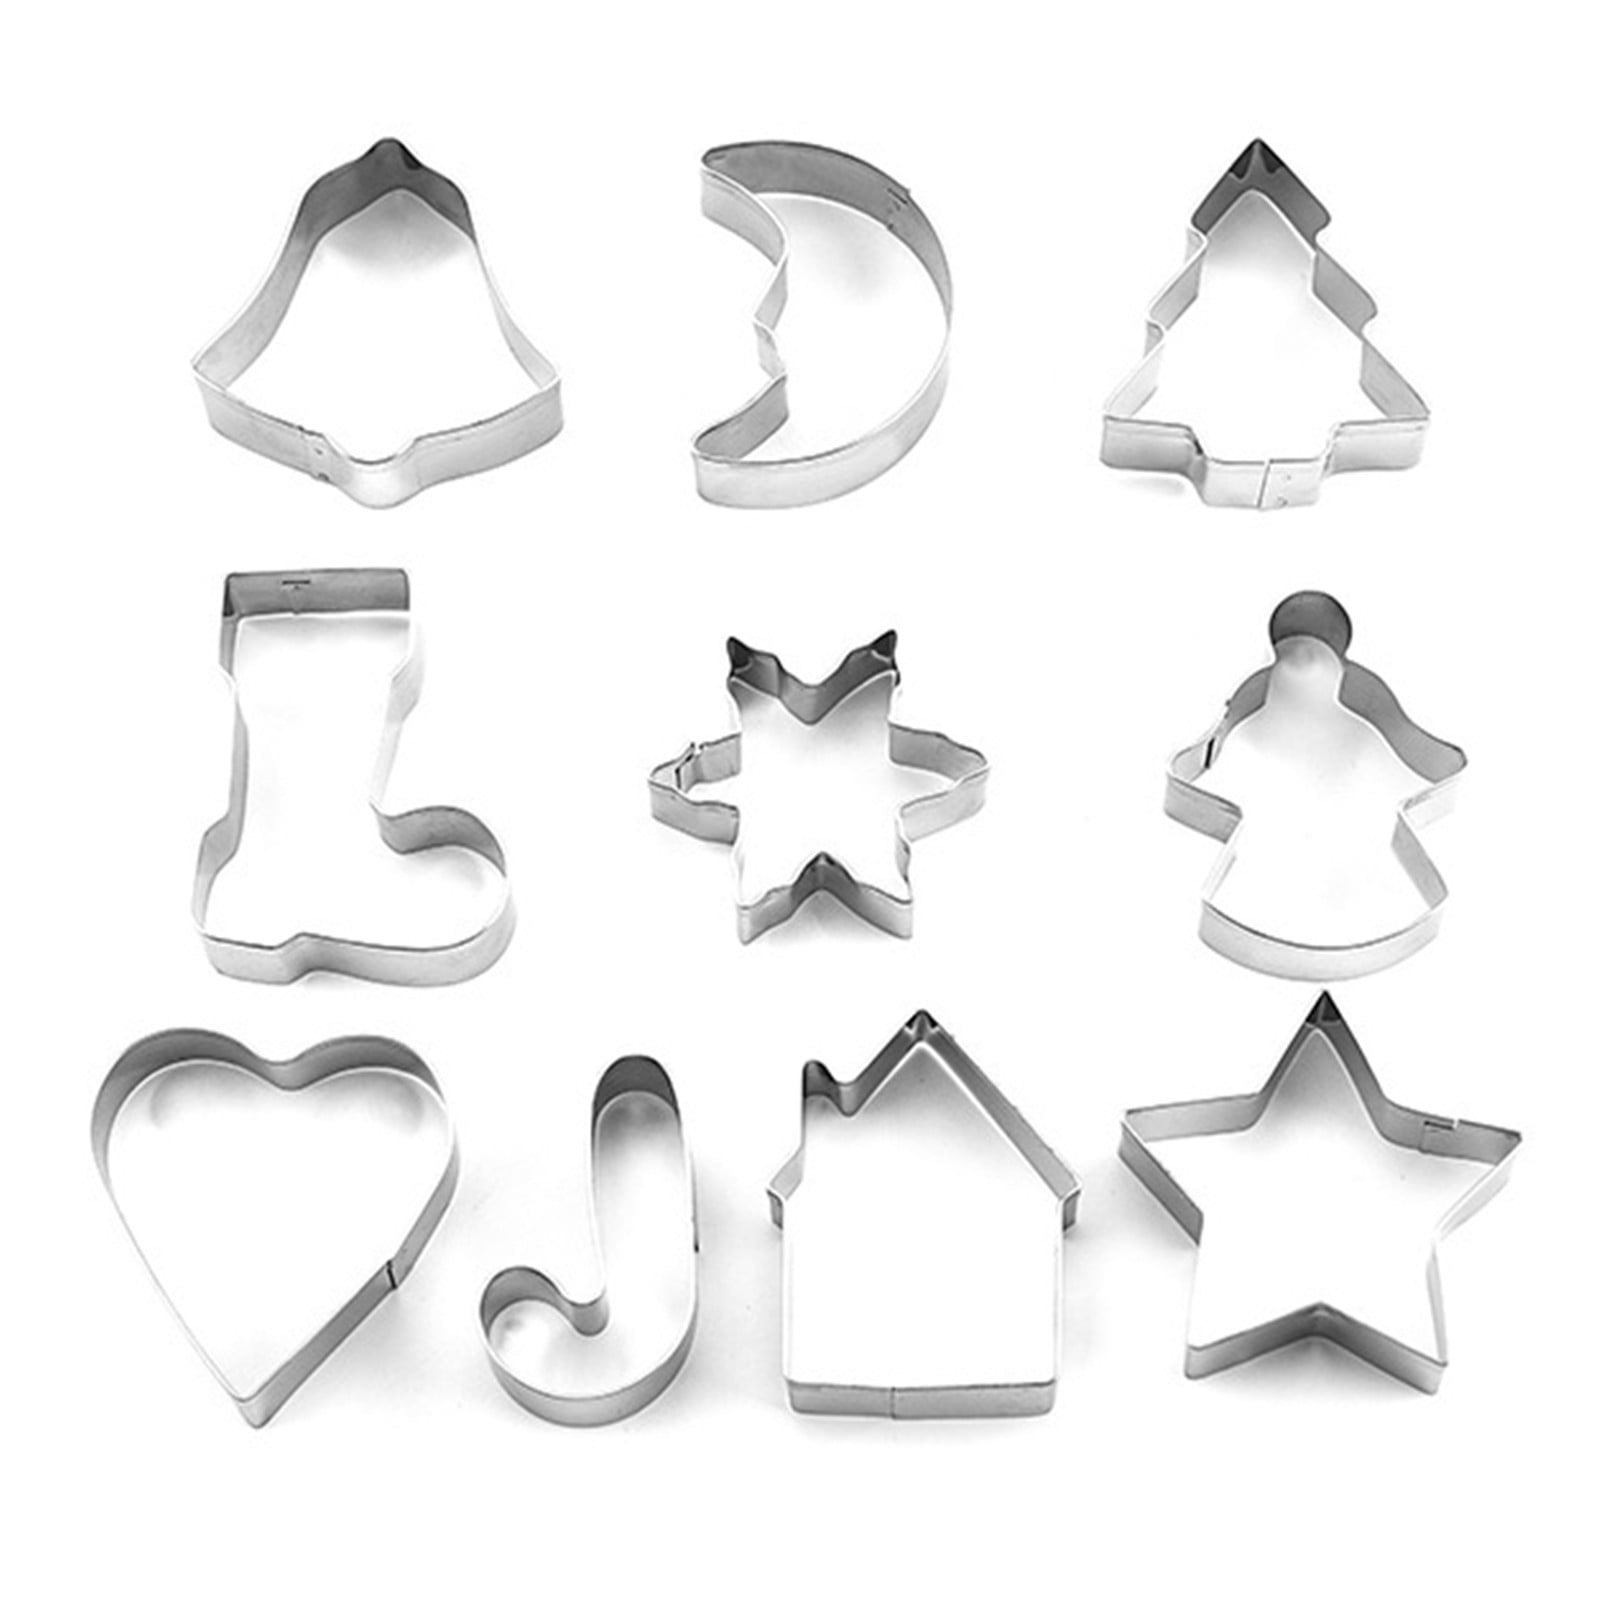 2023 Summer Savings Clearance! Wjsxc Home and Kitchen Gadgets,30PCS Stainless Steel Cake Dessert Cookie Cutter Mold DIY Baking Tools A, Size: One Size